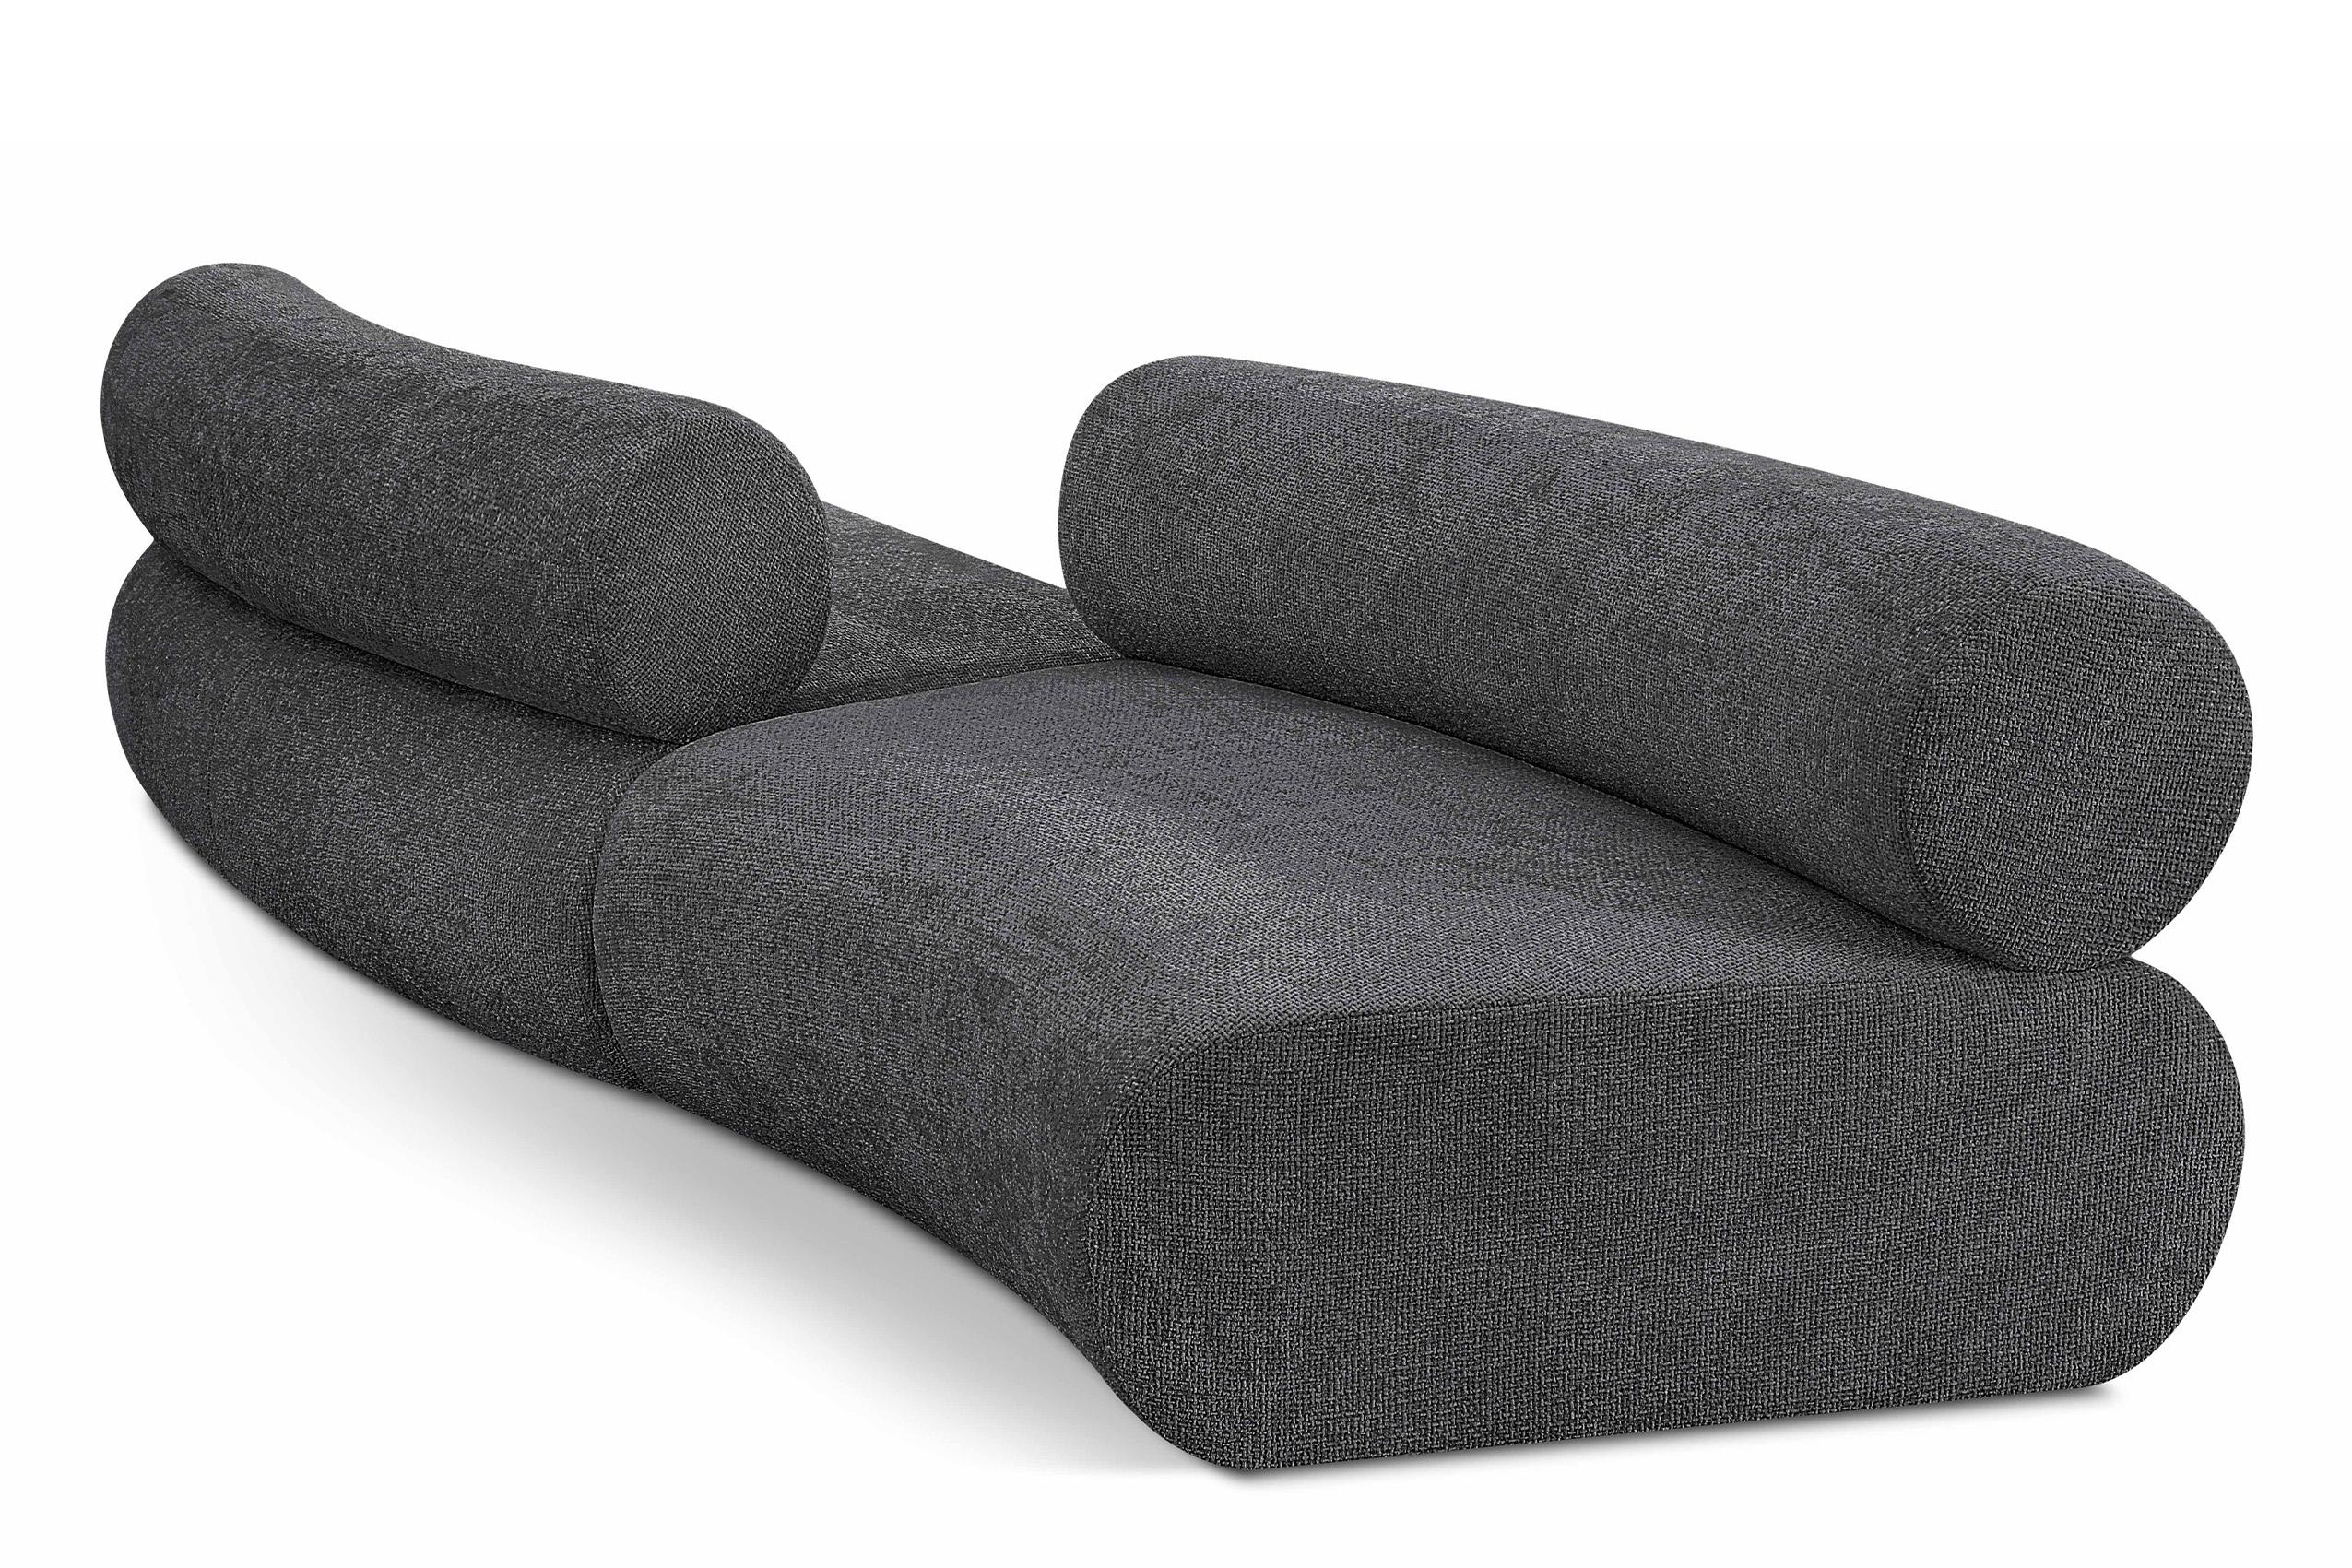 Contemporary, Modern Modular Sectional Sofa Bale 114Grey-S2B 114Grey-S2B in Charcoal Grey Chenille